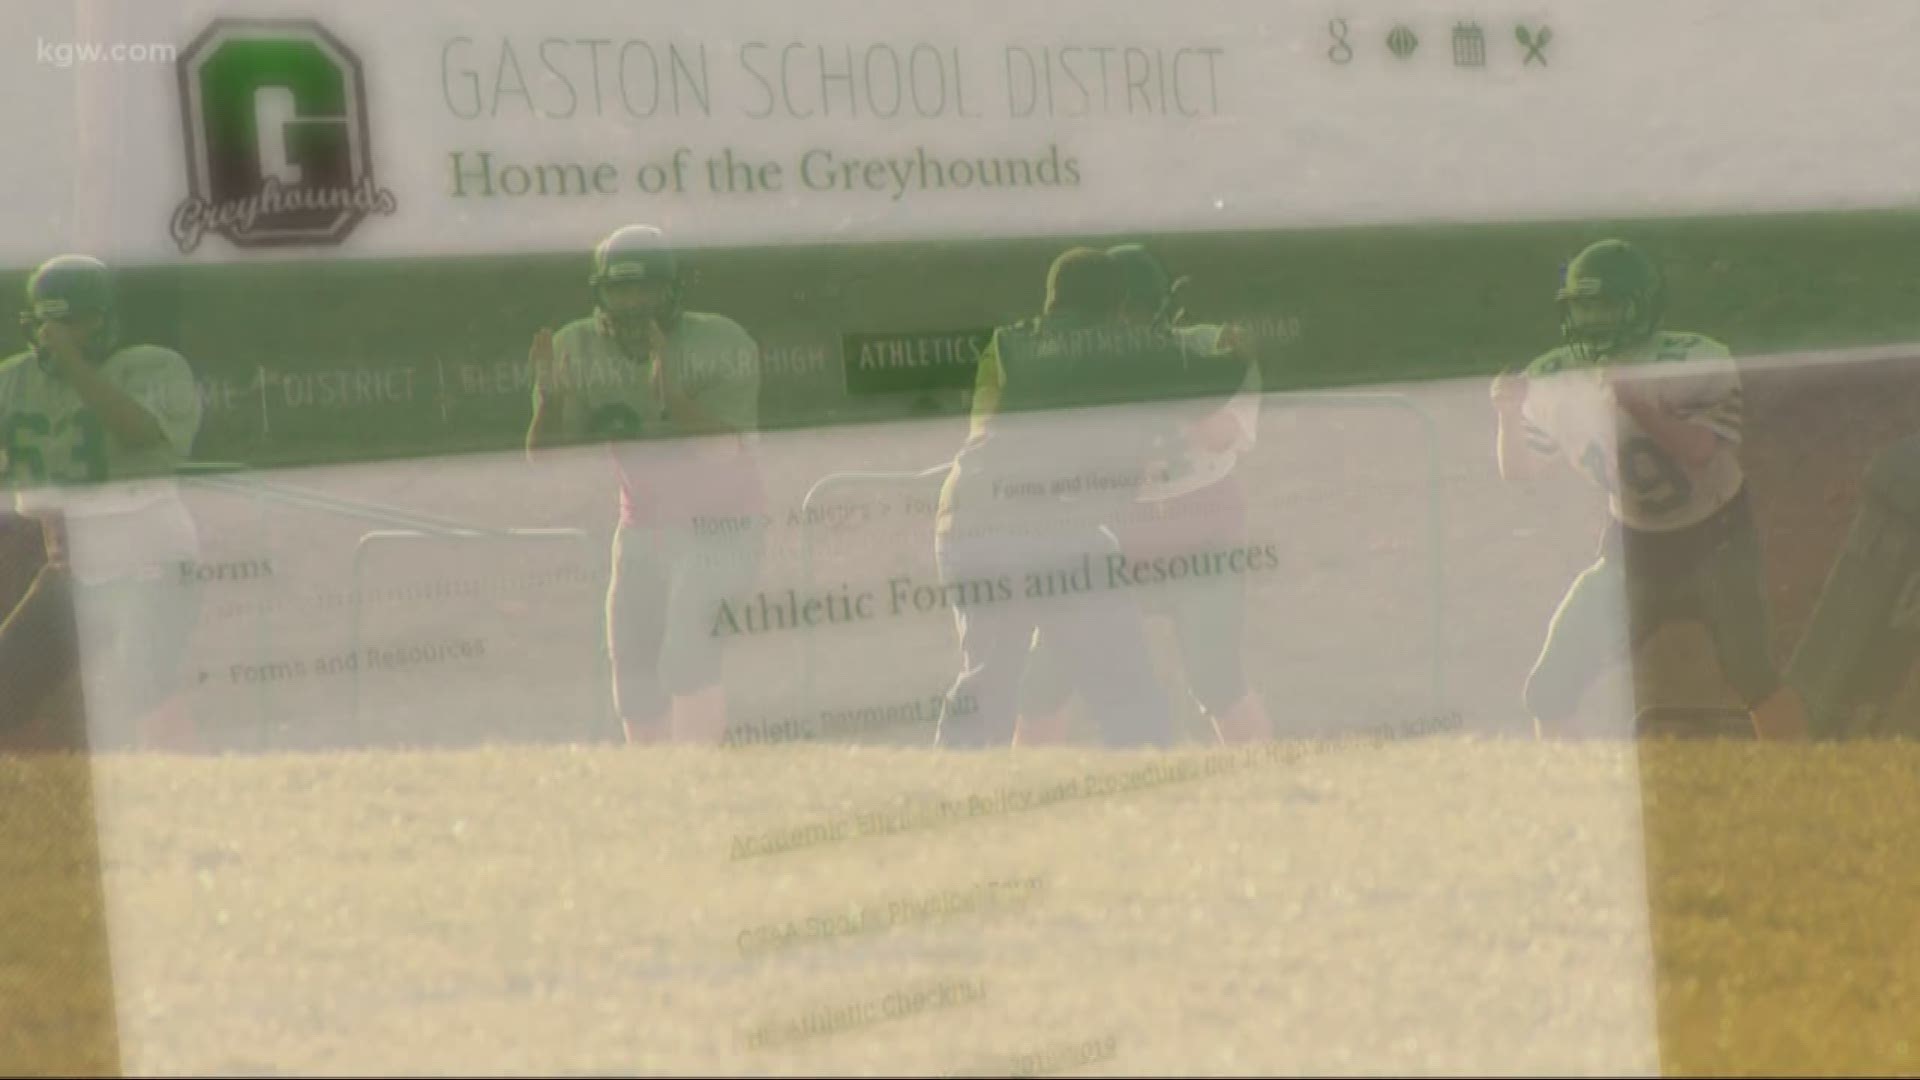 Parents say their kids were unfairly suspended after drugs were introduced at a Gaston party.